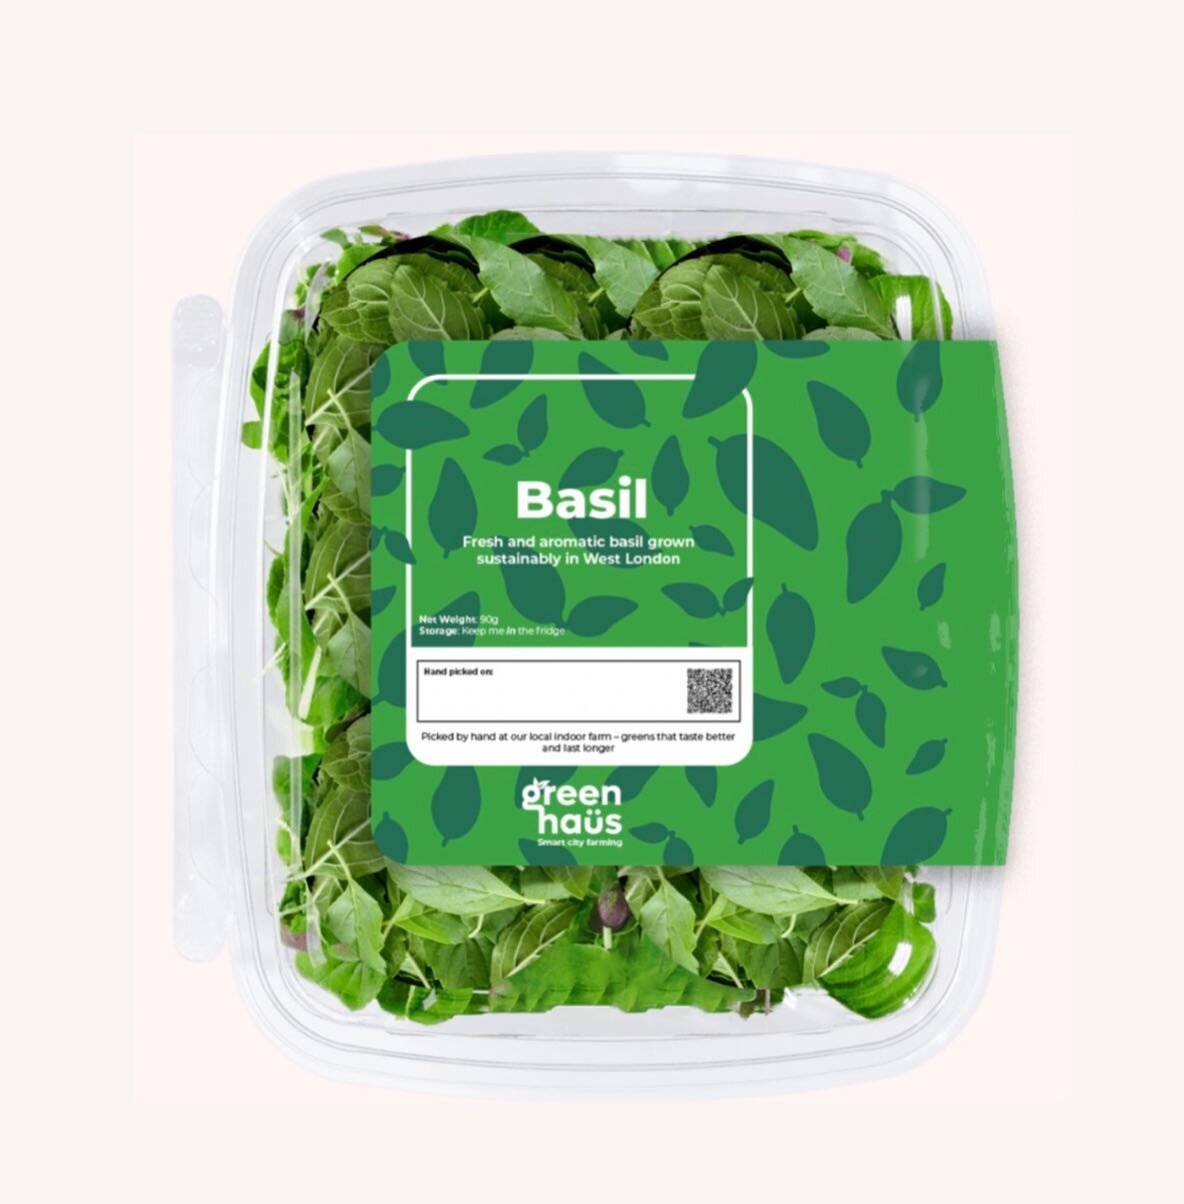 Big basil leaves with a sweet aroma and bold flavour 🌿 
Introducing our new fresh produce - hand-harvested daily and packaged for freshness. Grown just down the road at our sustainable smart city farm, you won&rsquo;t find anything fresher! Find us 